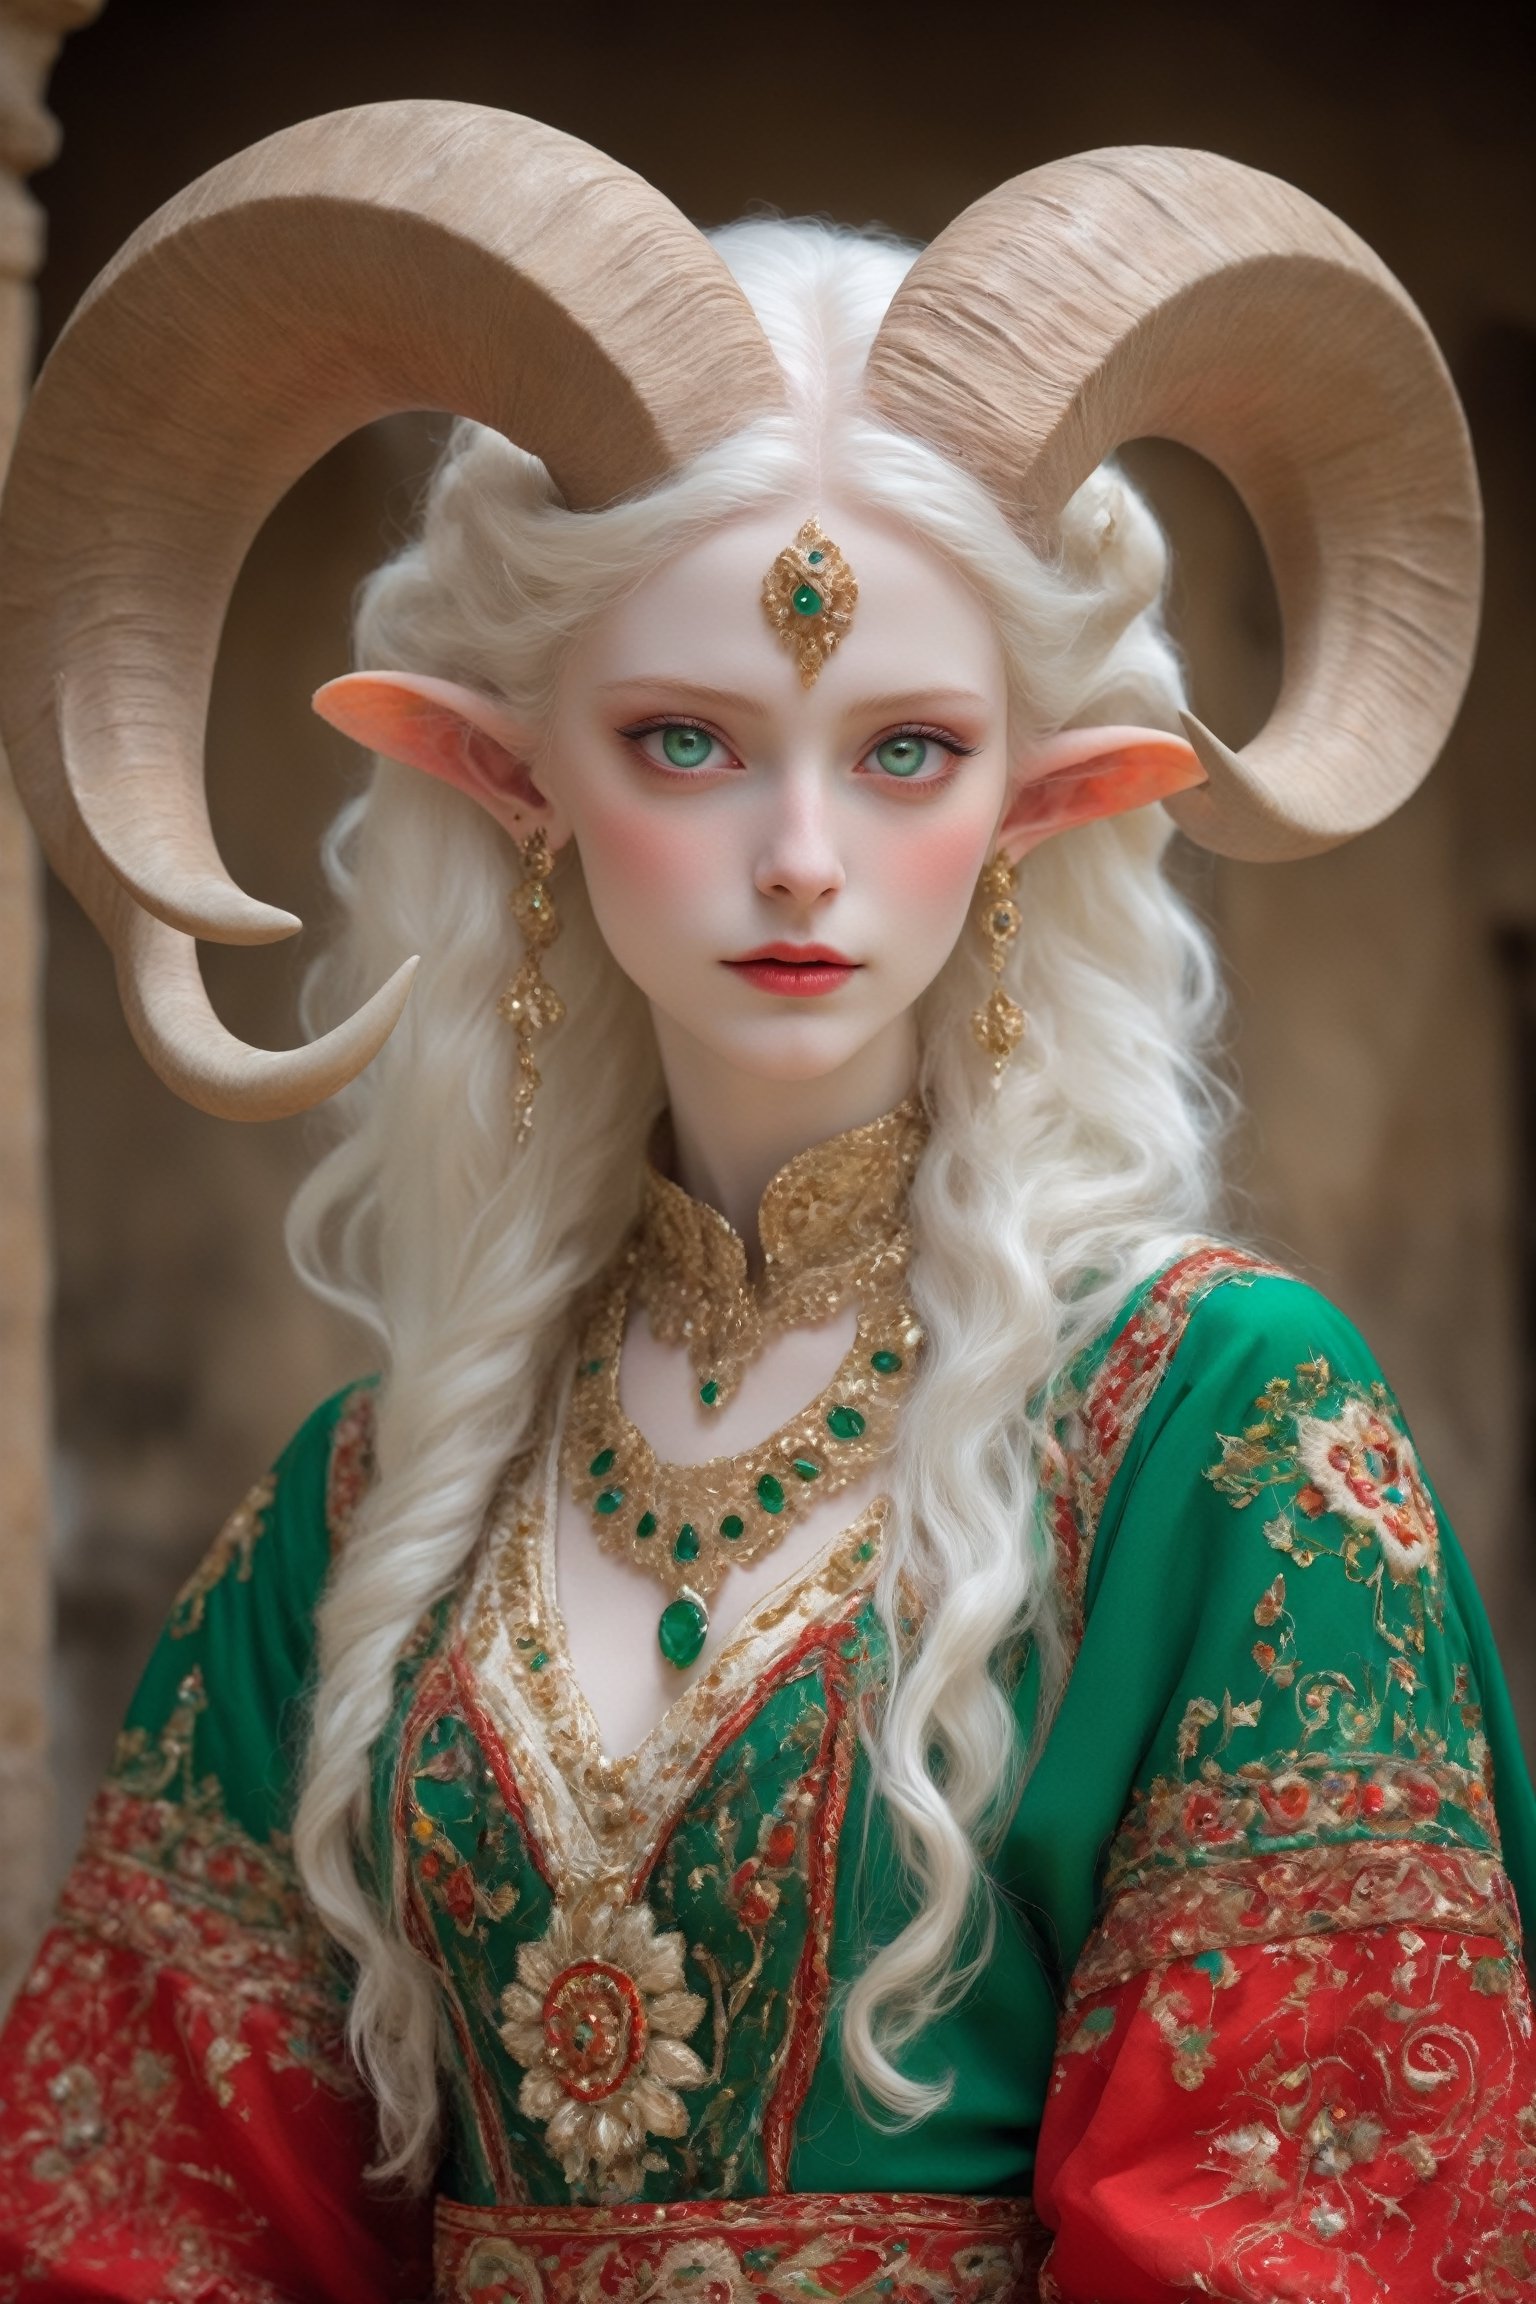  albino devil girl,
 (complex long horns: 1.2), in traditional Italian and Sardinian costume, endlessly beautiful emerald eyes, her ethereal presence accentuated by the transparency of her pale skin, her striking emerald eyes radiating an otherworldly glow,
Break
Wrapped in the vibrant colors and intricate designs of her artistically embroidered blouse, colorful skirt, apron, and Sardinian folk costume in red and white tones, she exudes an enchanting allure that transcends the realms of fantasy and reality,photo_b00ster